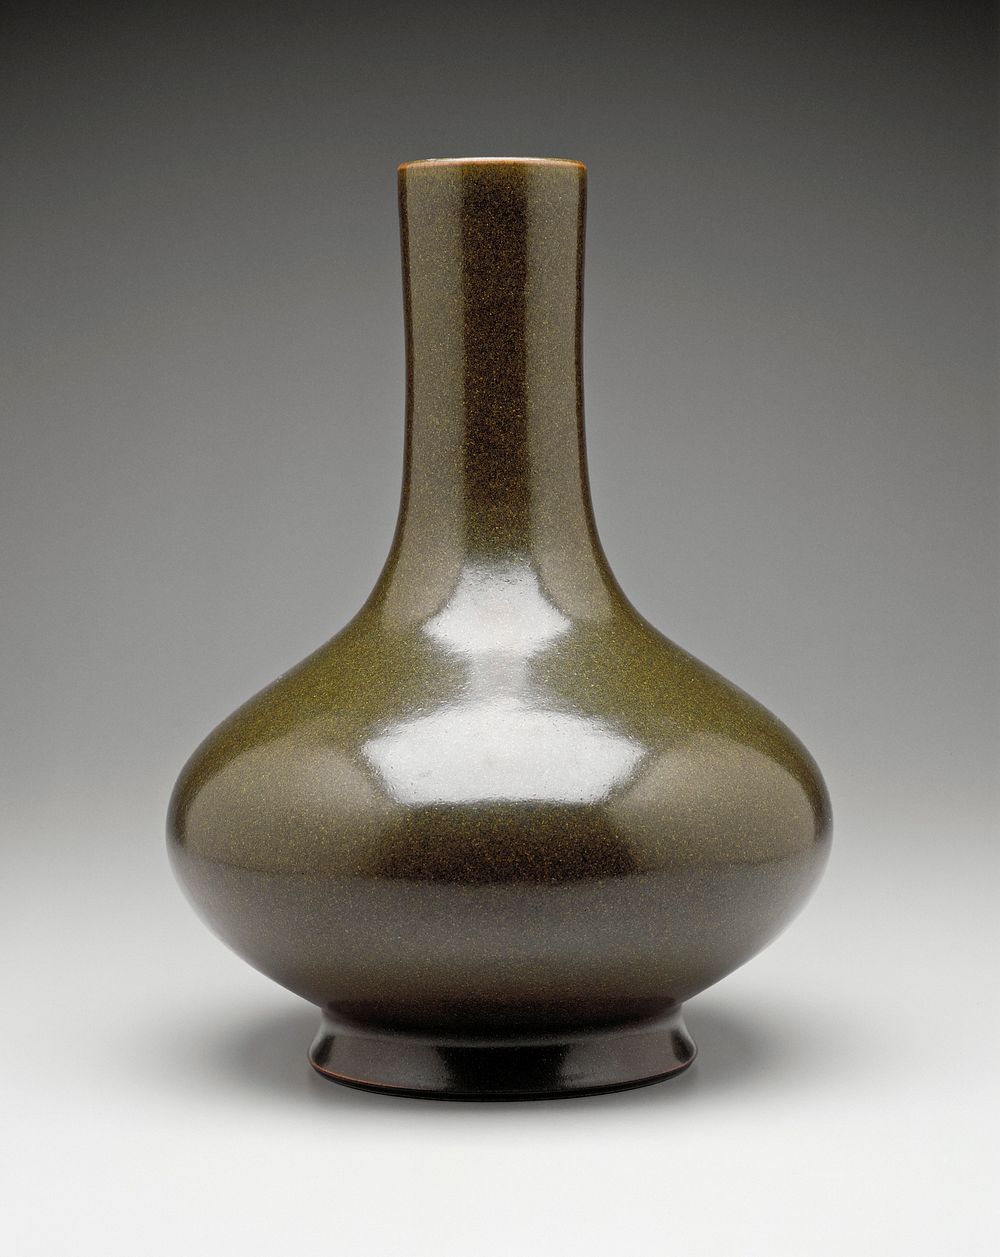 porcelain vase with compressed globular body; tall cylindrical neck; cha yeh-mo 'teadust' glaze. Original from the…